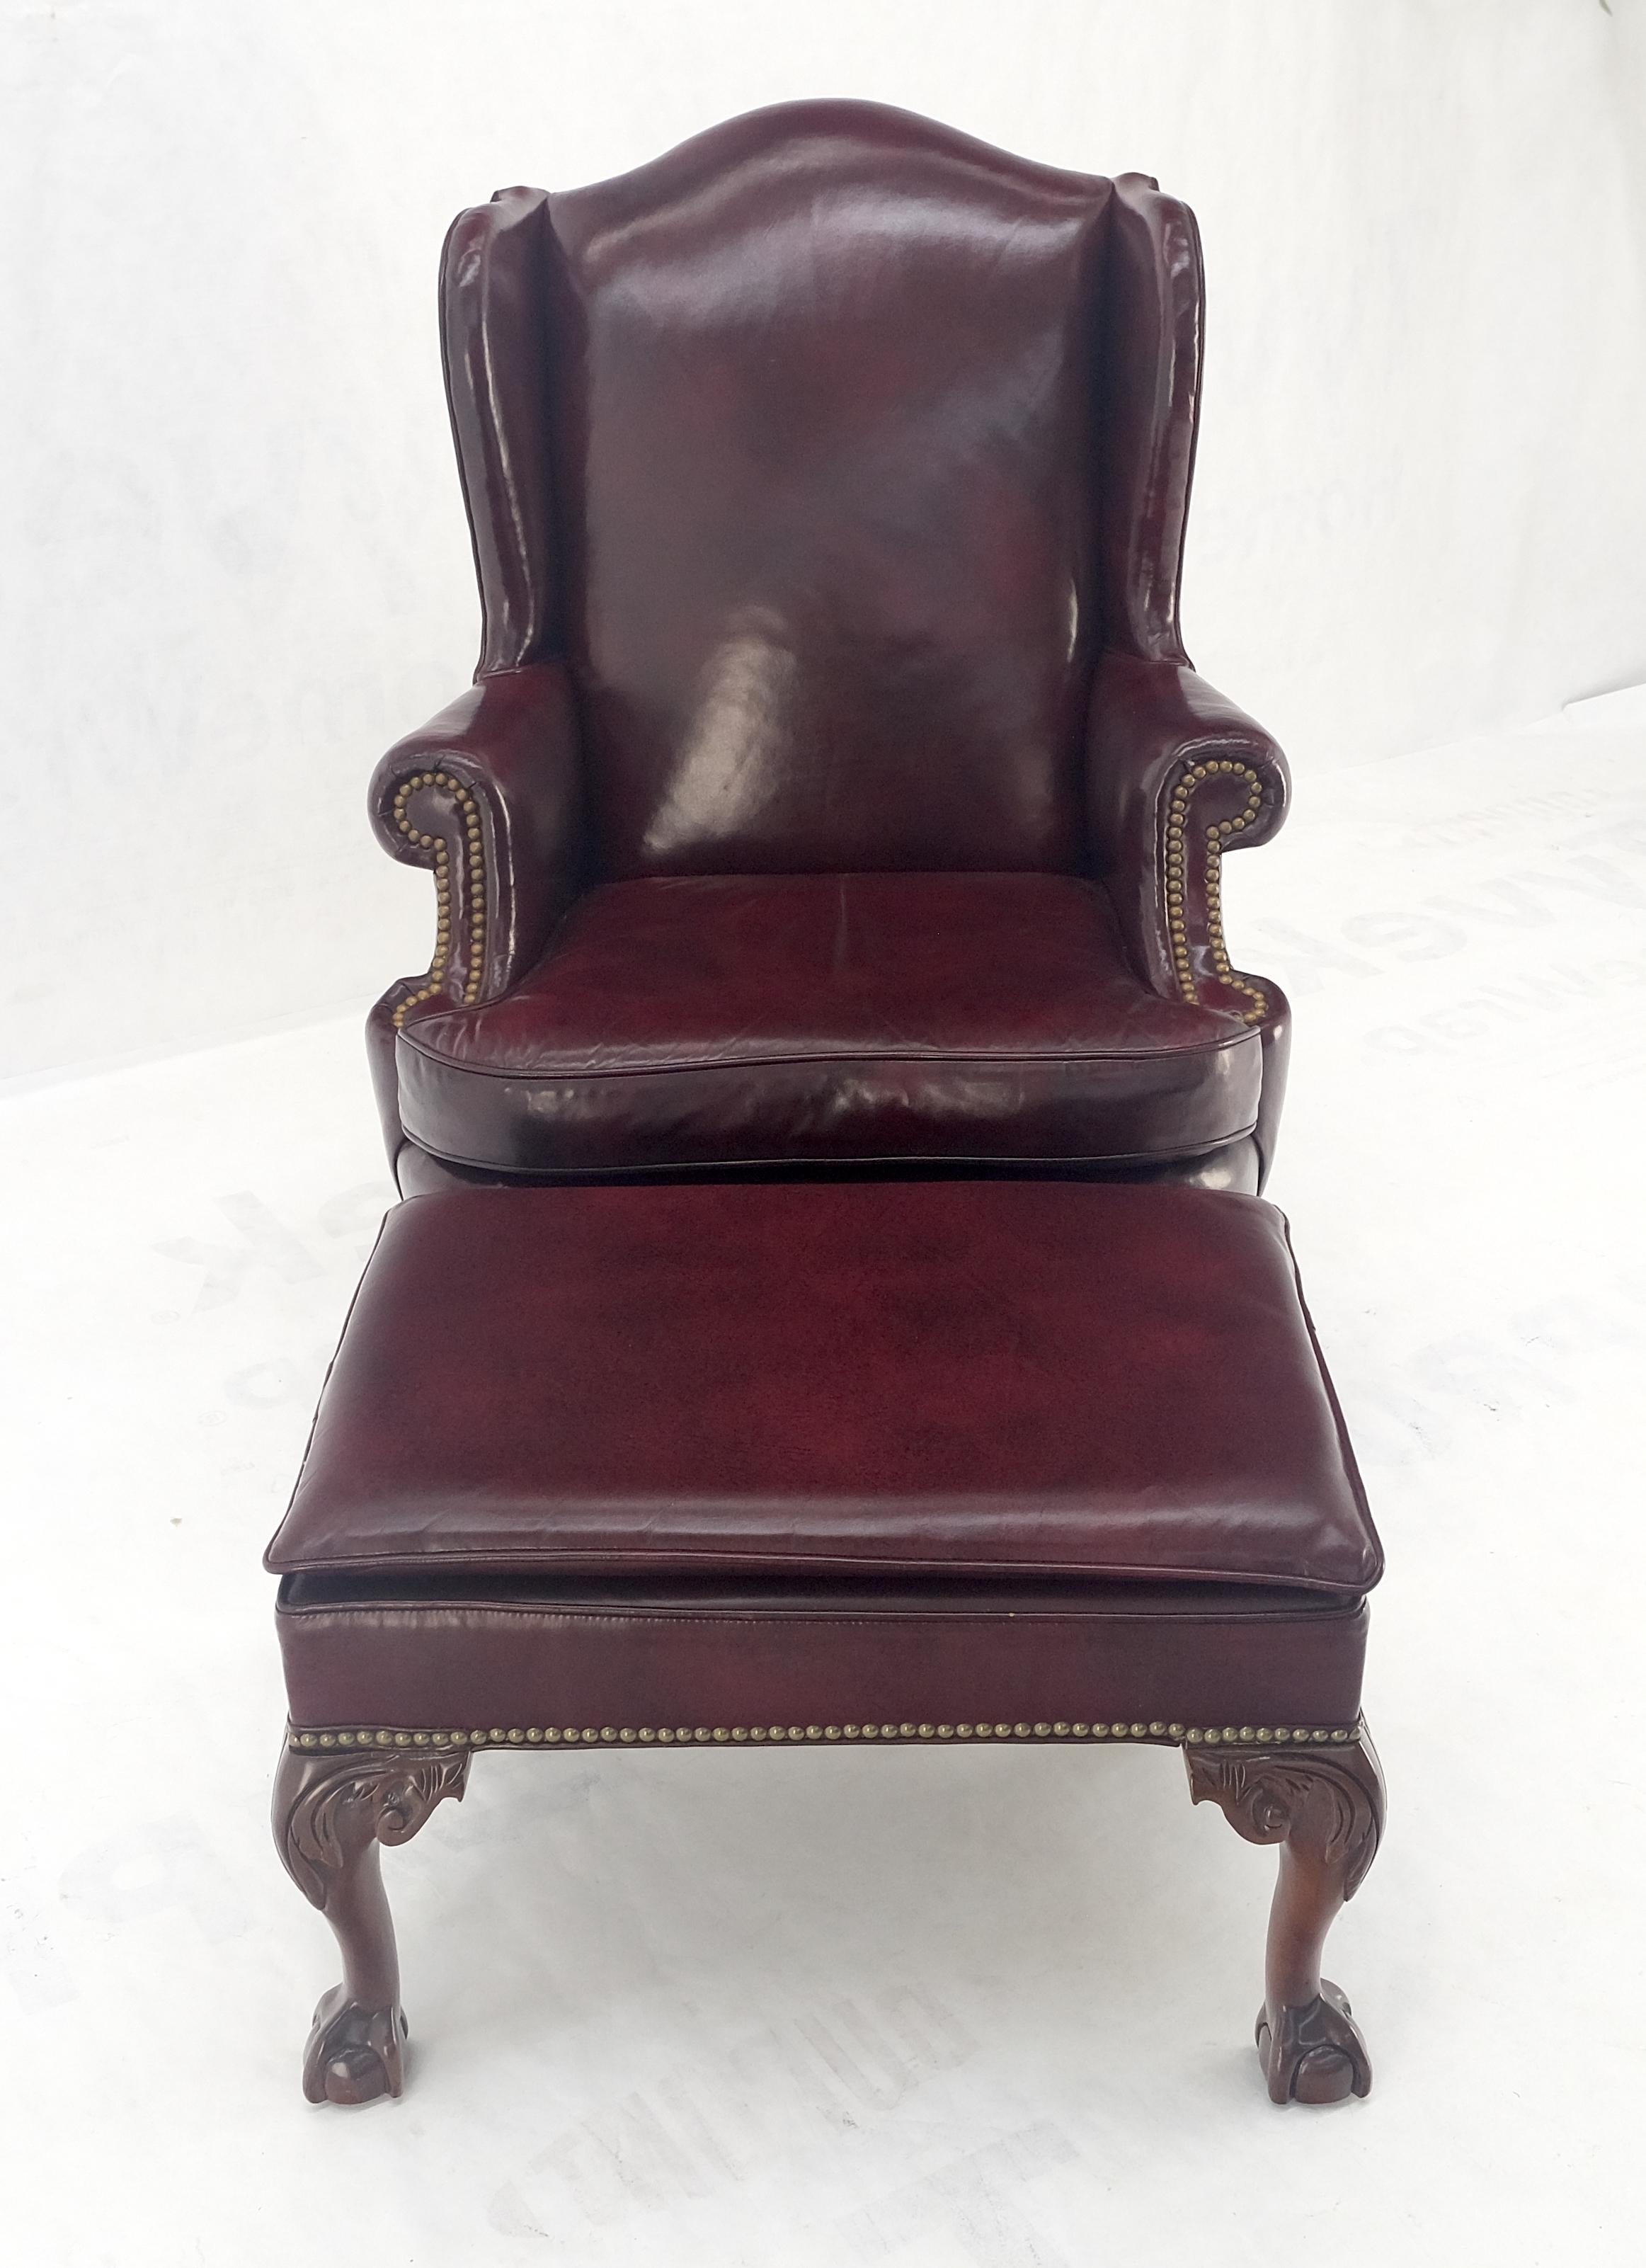 Kindel Burgundy Leather Upholstery Carved Mahogany Legs Wingback Chair & Ottoman In Good Condition For Sale In Rockaway, NJ